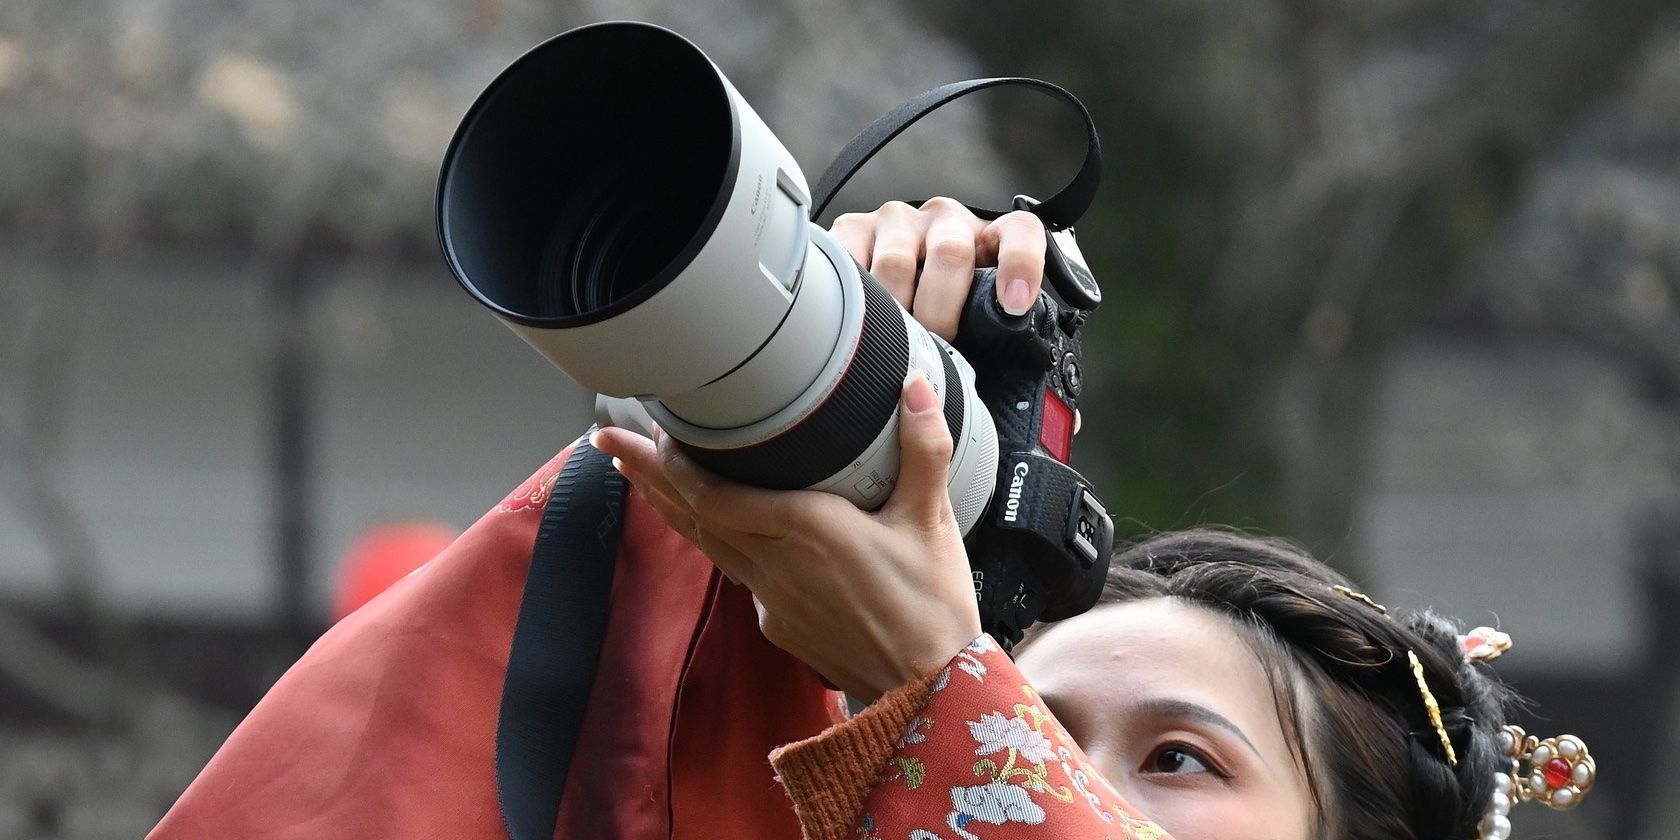 A woman holding a camera with a long telephoto lens